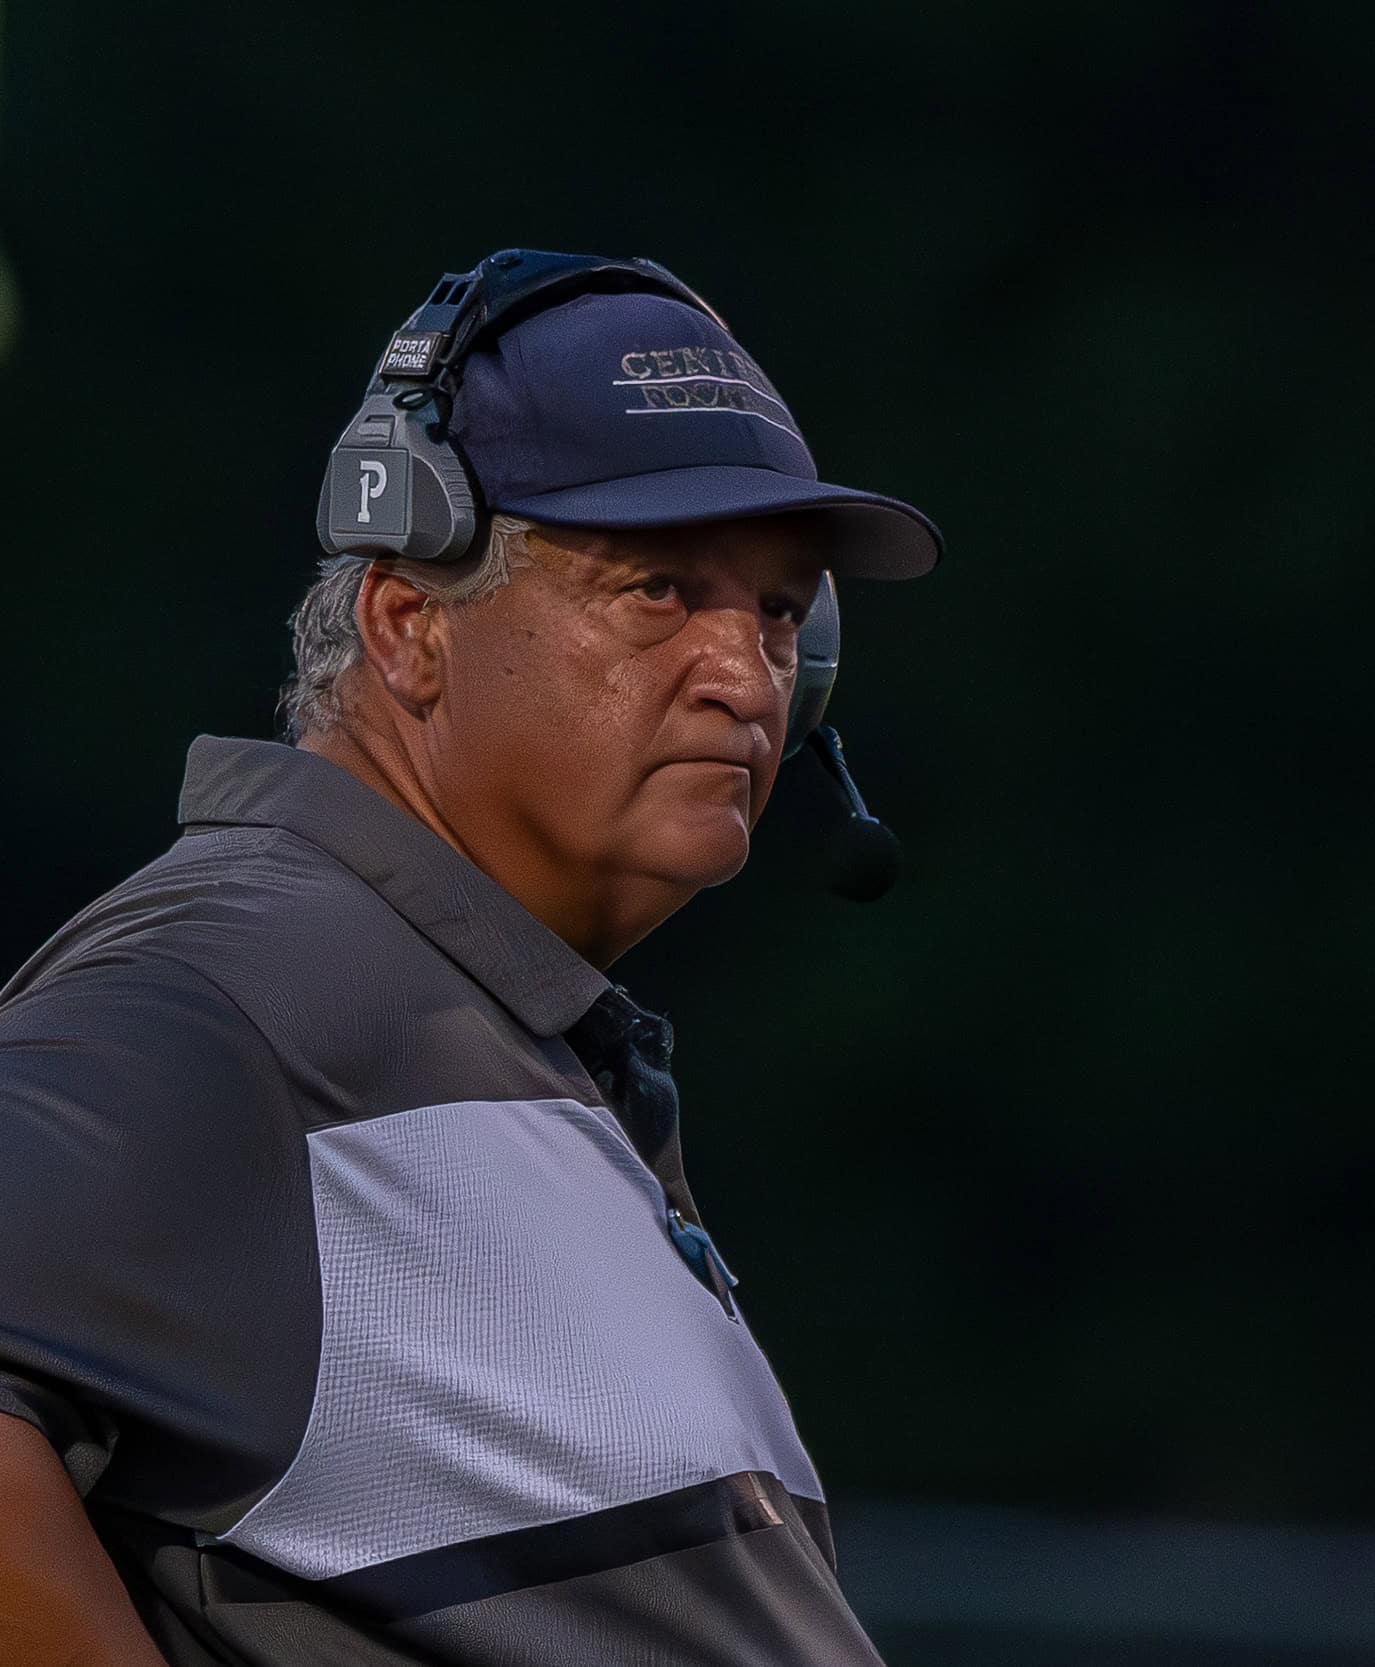 Central High’s Head Coach, Jim Pusateri, checks the scoreboard during a time out in the game with visiting Wesley Chapel Friday at the Bear Den. Photo by [Joseph DiCristofalo]